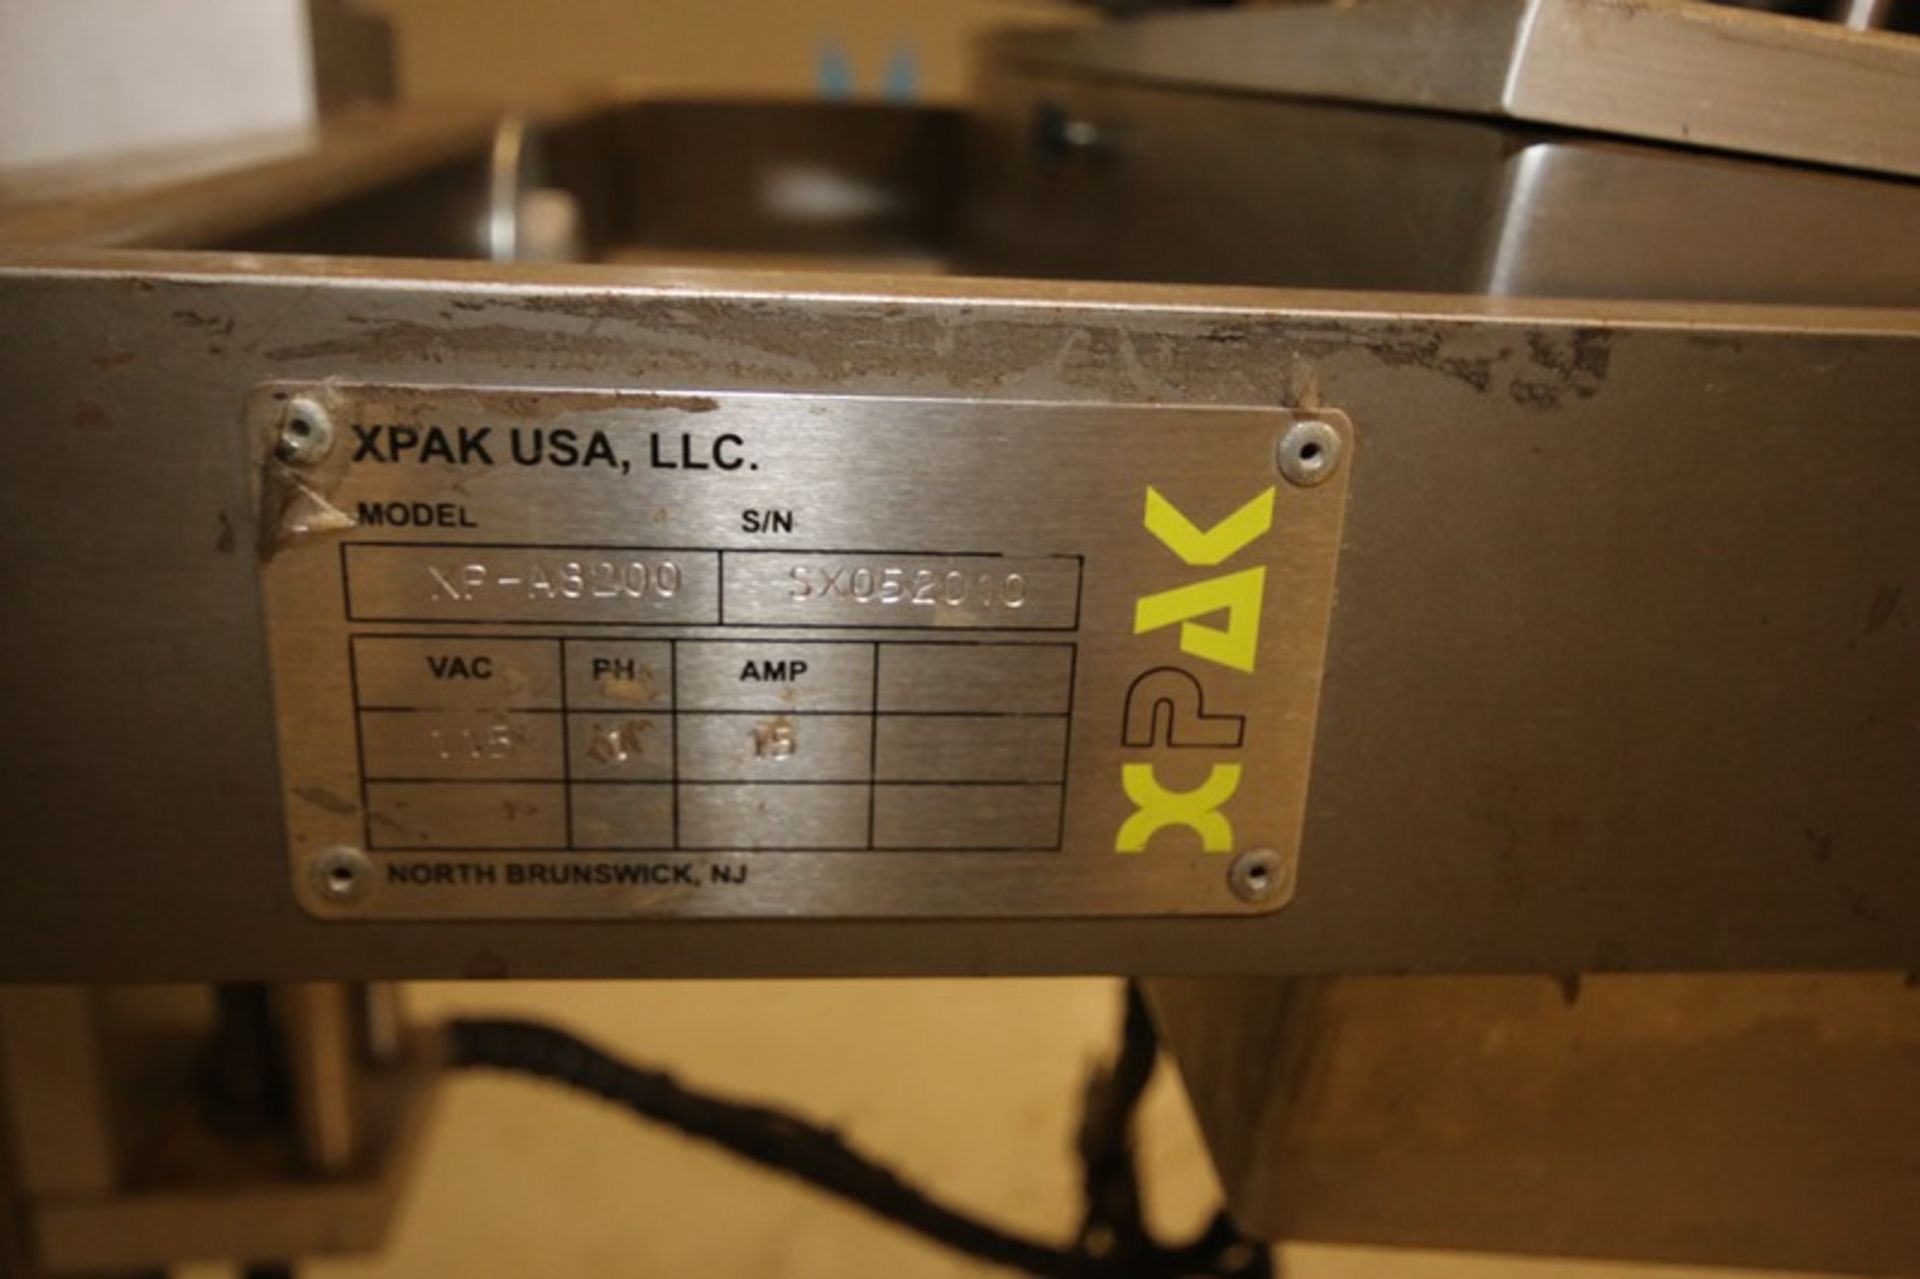 XPak Roll Fed Labeler, Model XP-A8200, SN SX052010, 115V, Mounted on Stand with Top Mounted Sato M- - Bild 8 aus 8